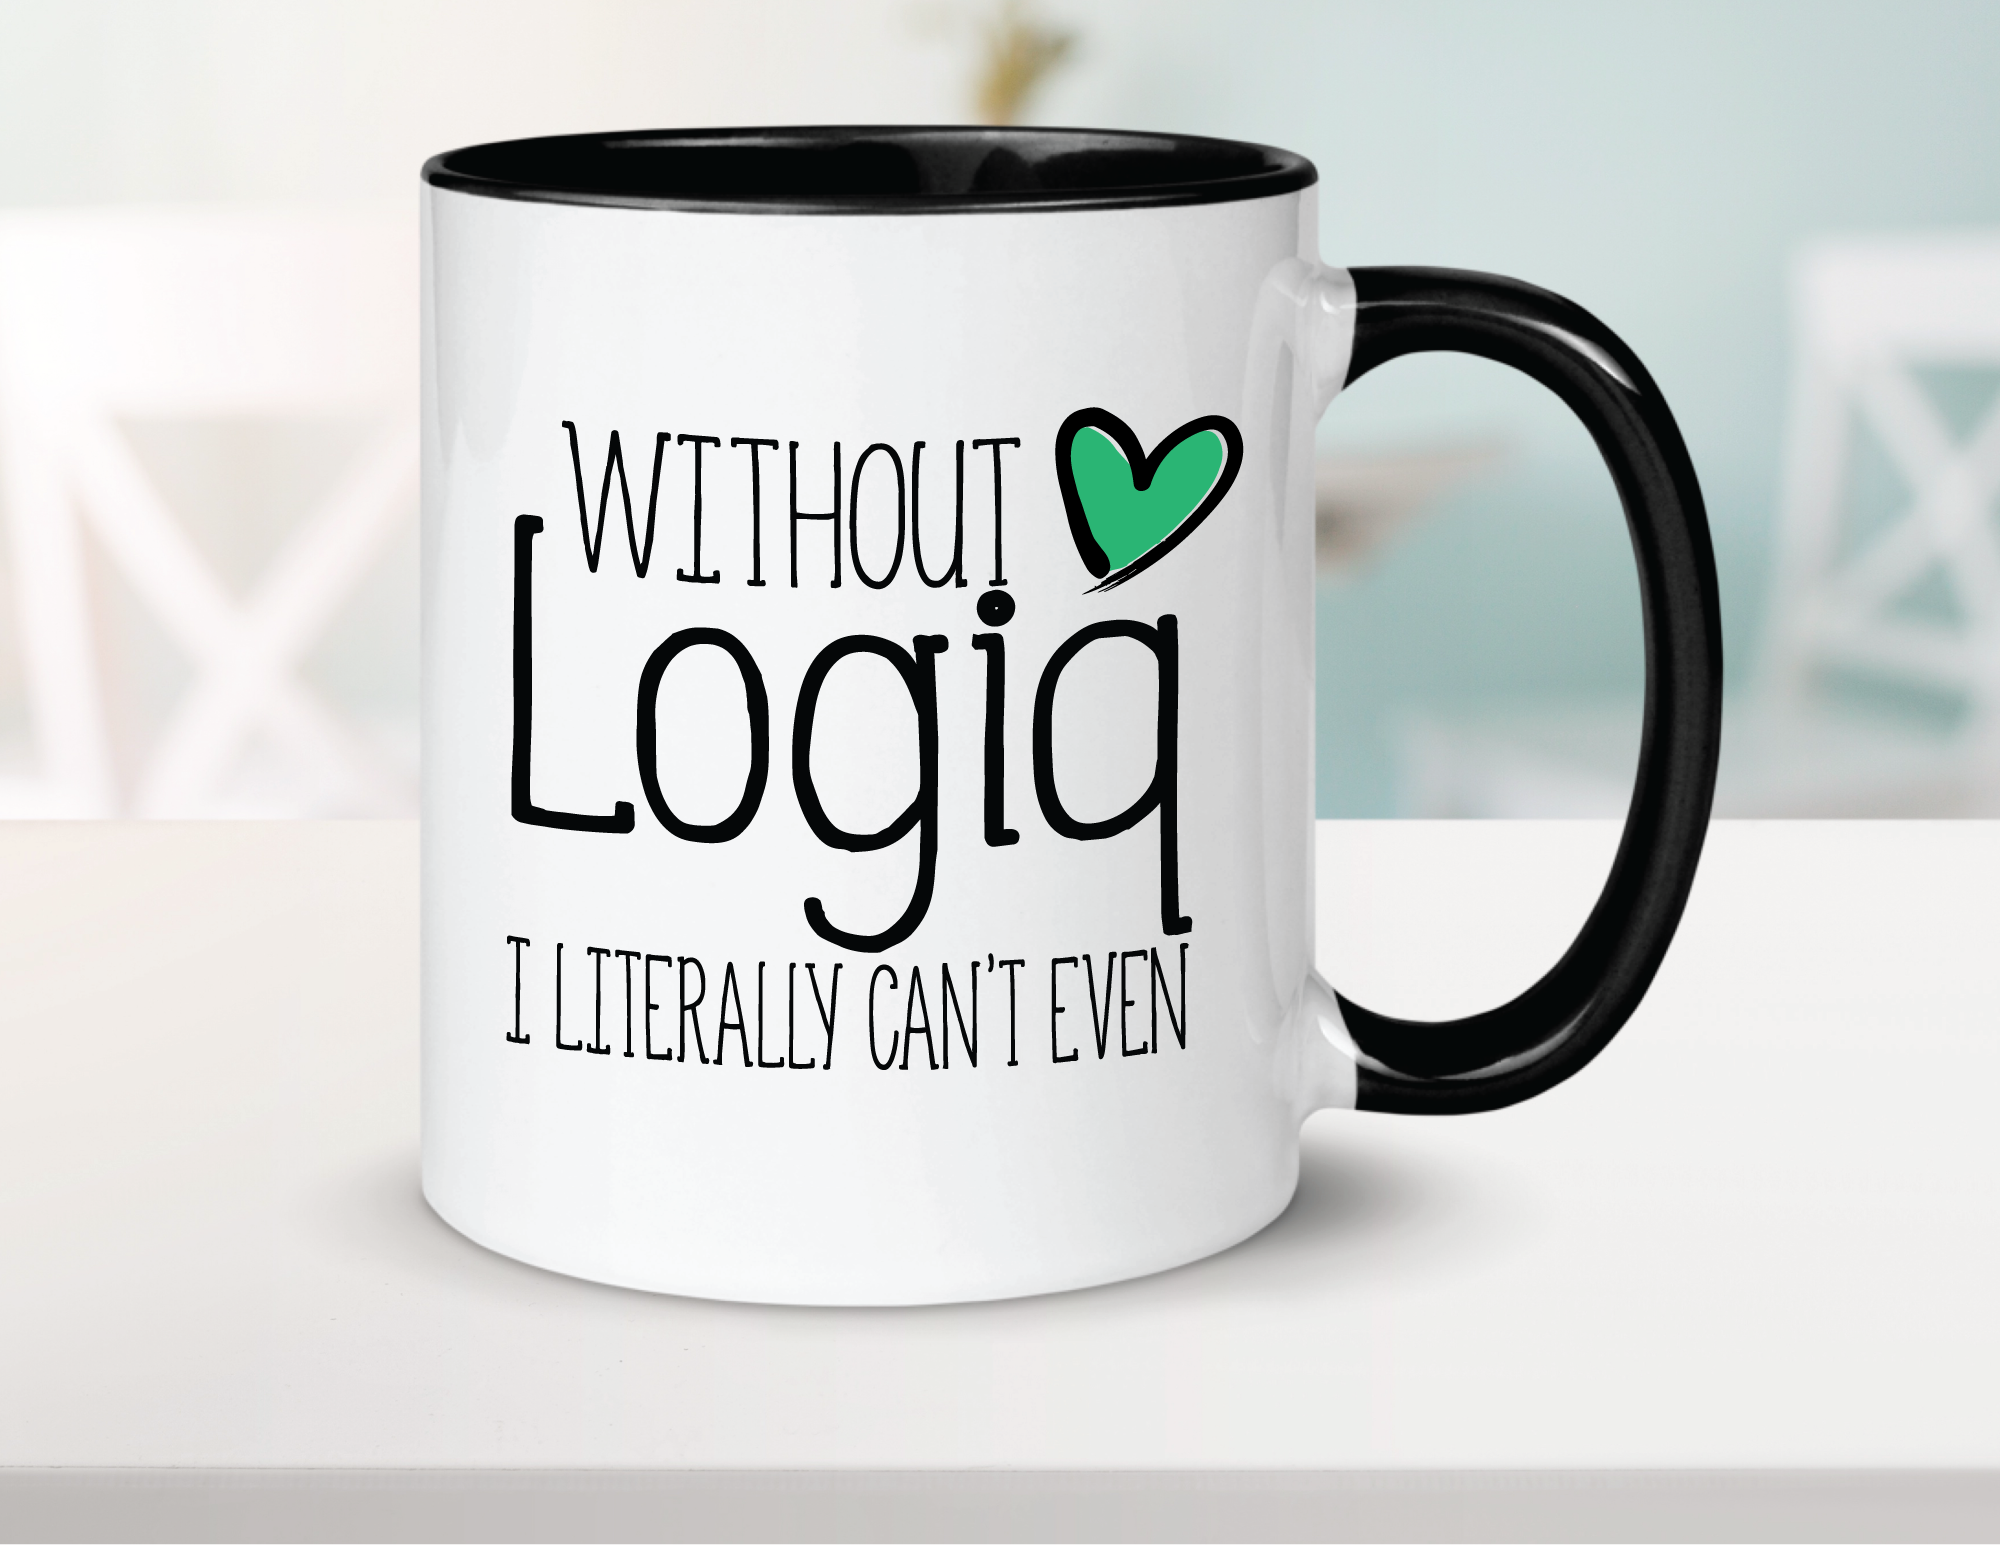 Without Logiq I Literally Can't Even Ceramic Coffee Mug 15oz